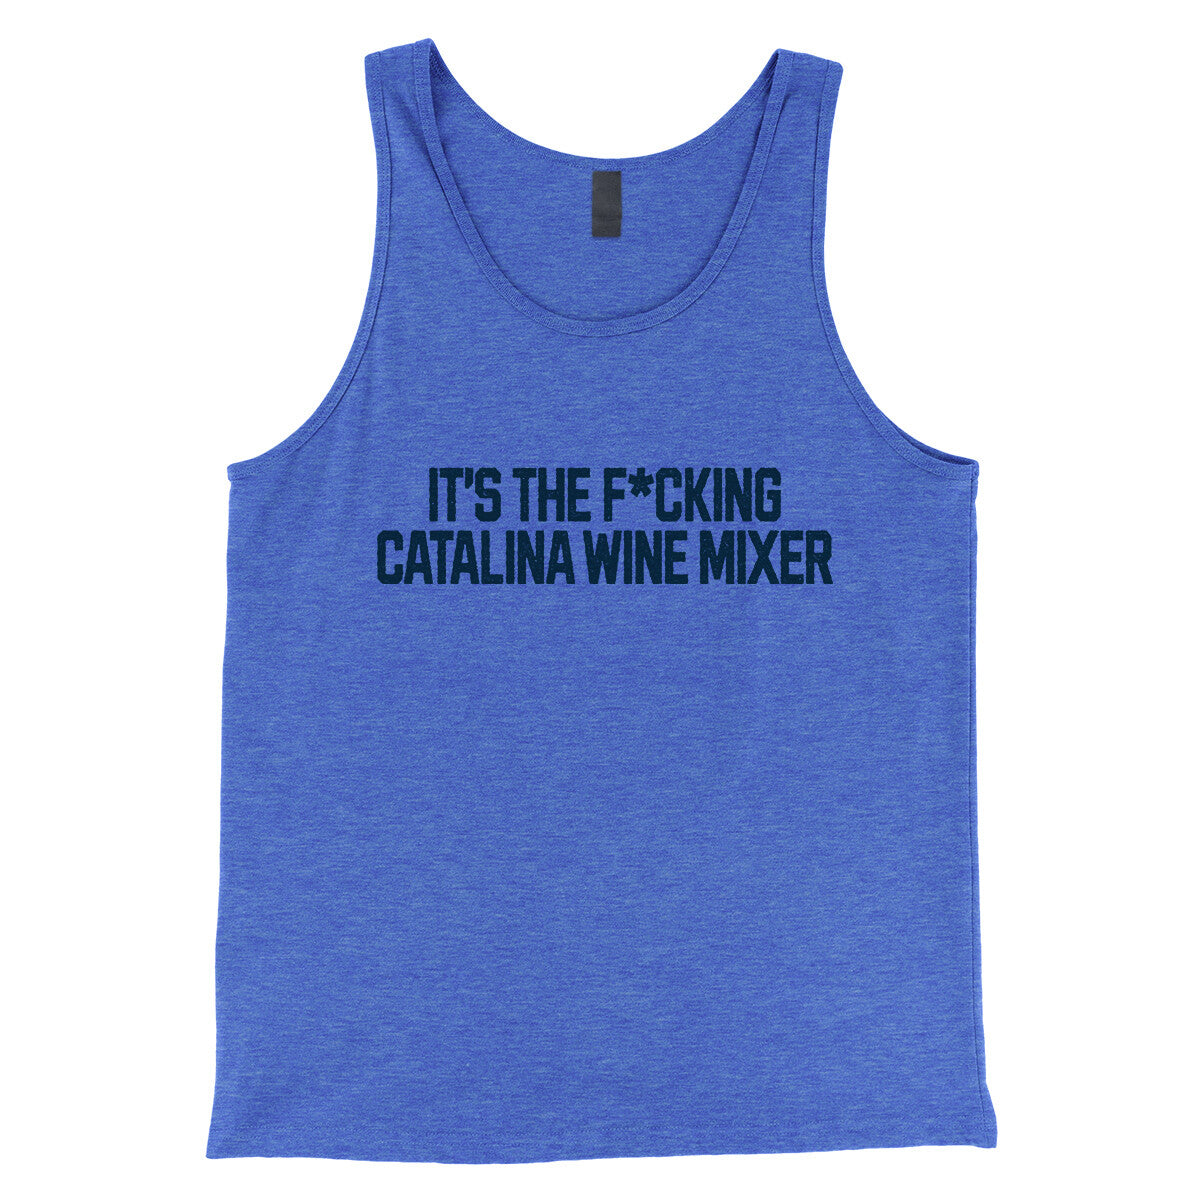 It's the Fucking Catalina Wine Mixer in True Royal TriBlend Color